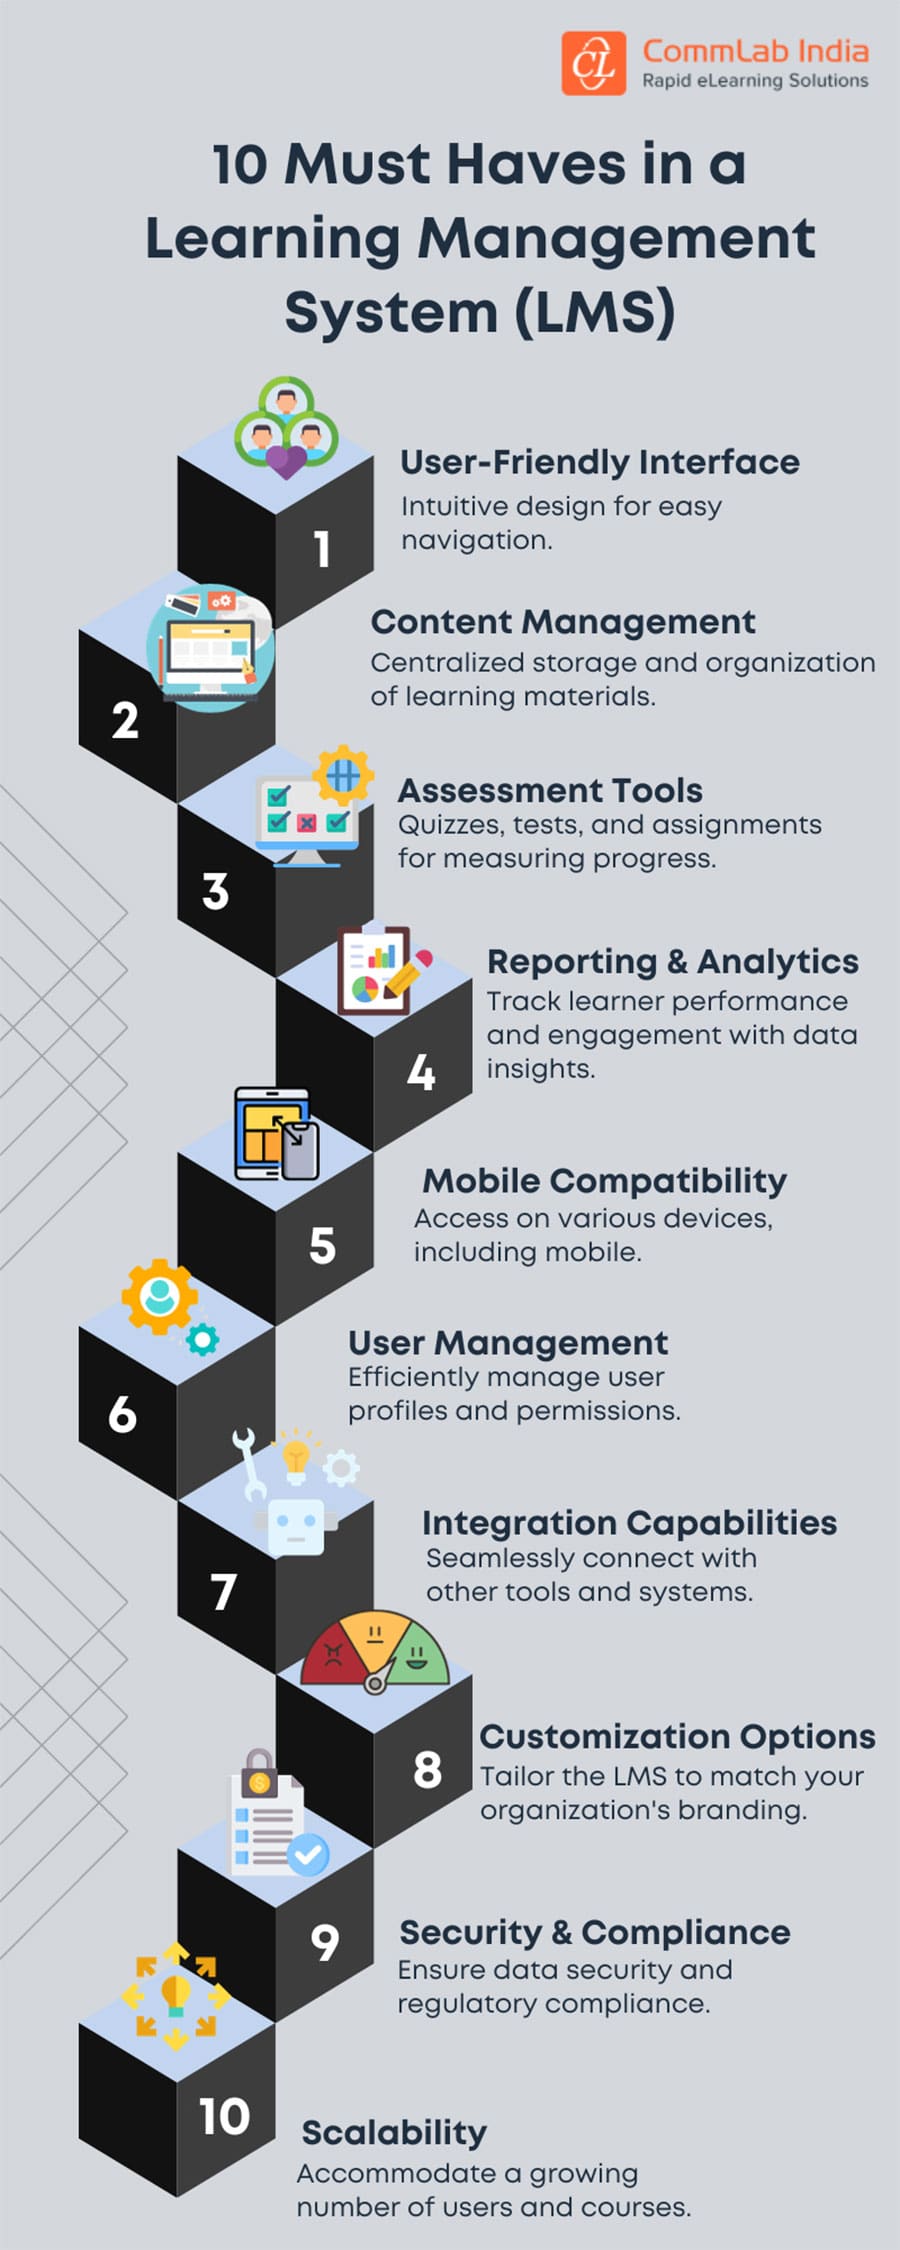 10 Must Have Features of a Learning Management System